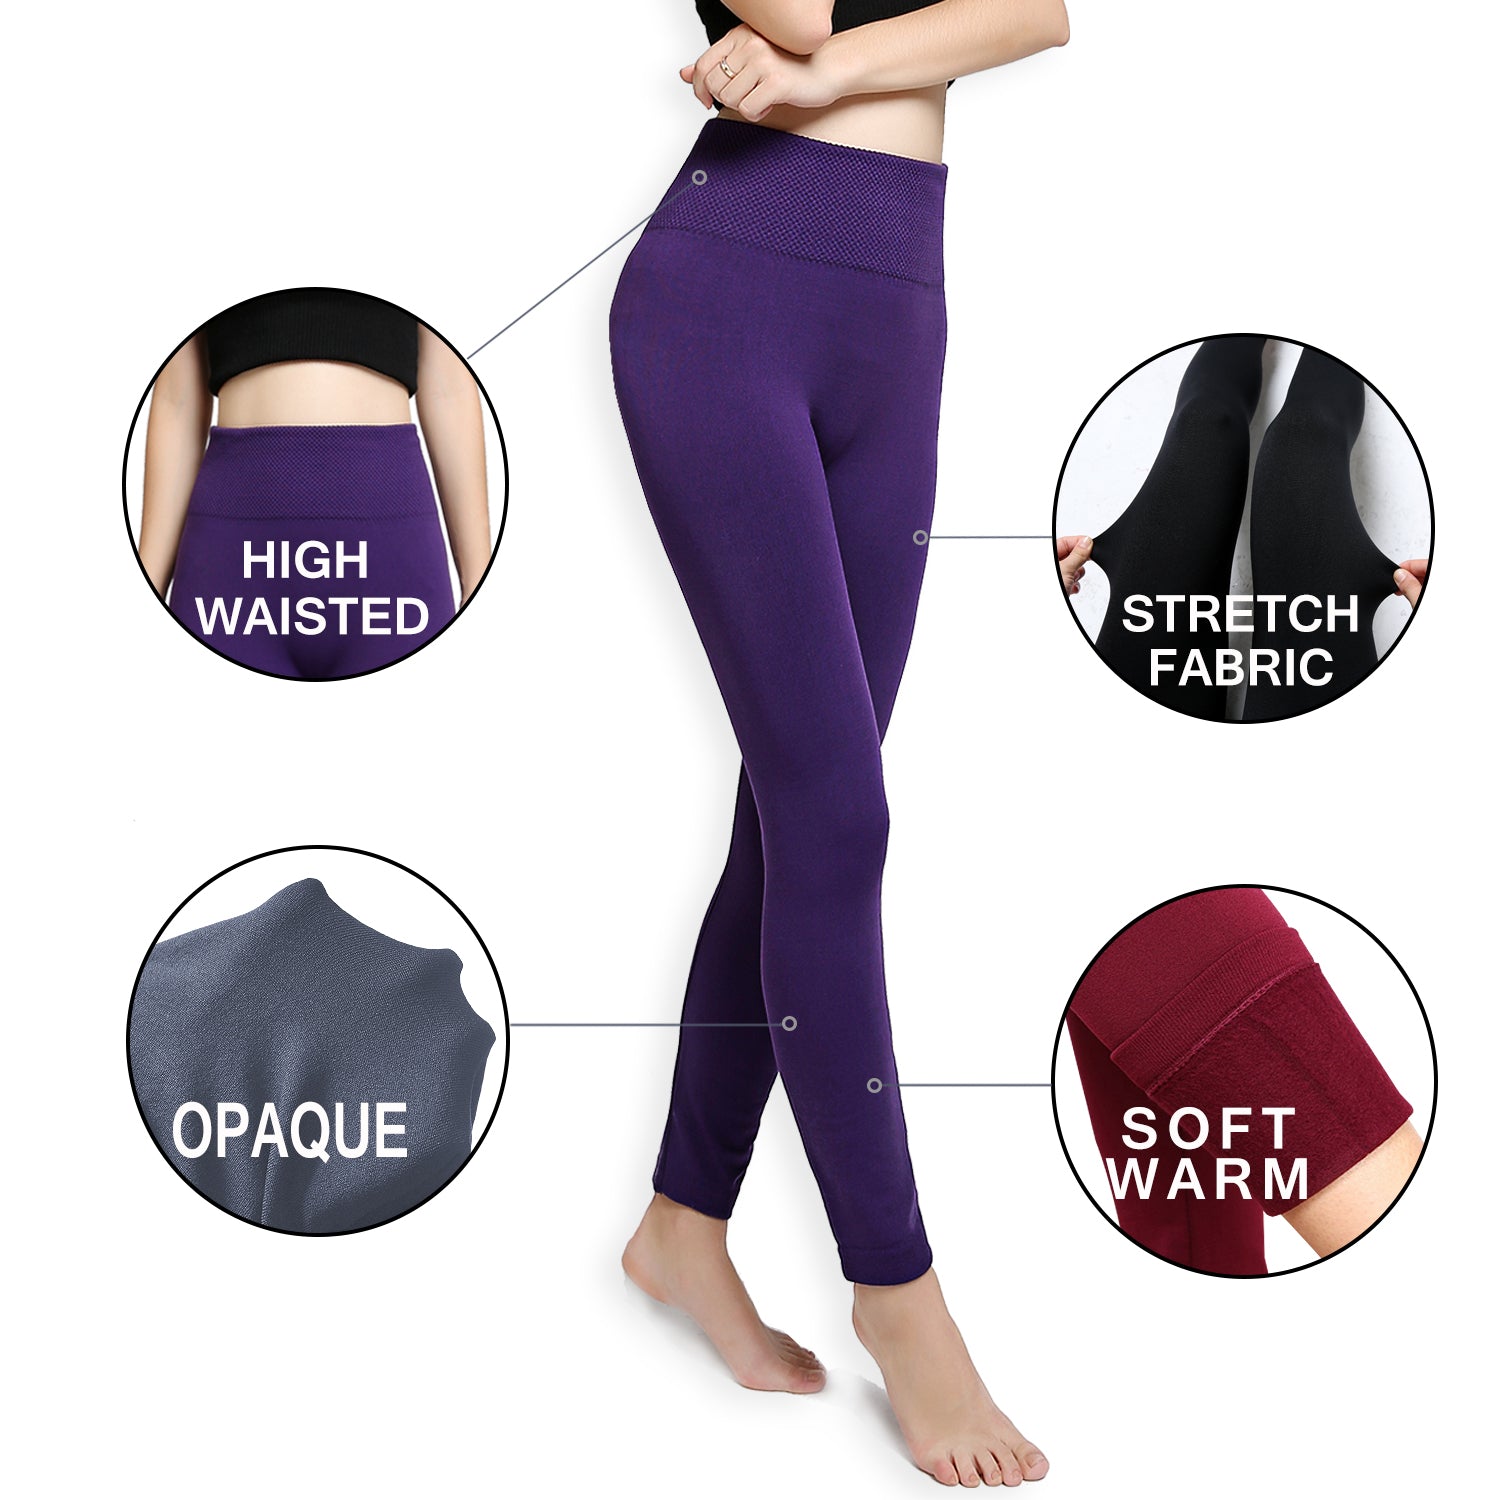 Fleece Lined Leggings Thick Brushed Ultra Soft Warm High Women